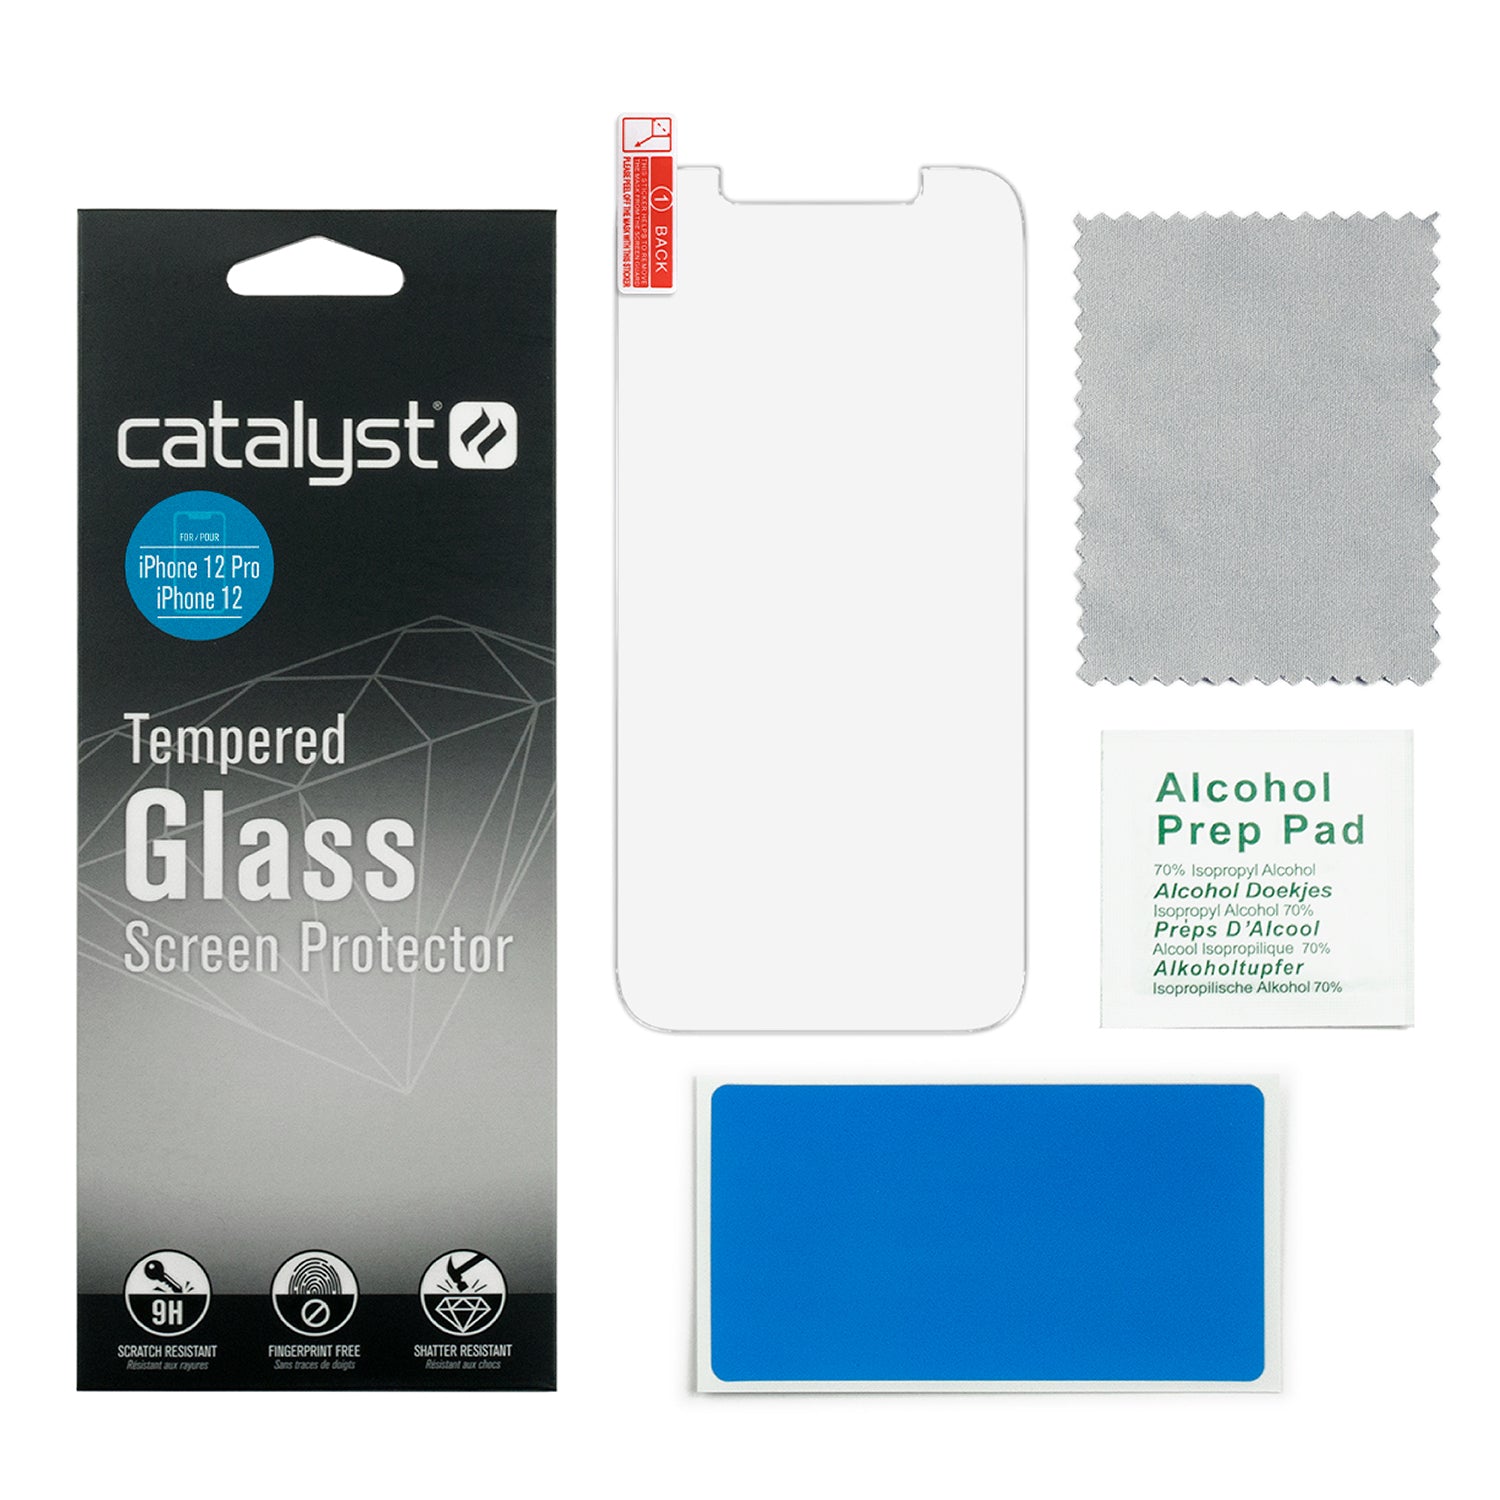 Add a Tempered Glass Screen Protector